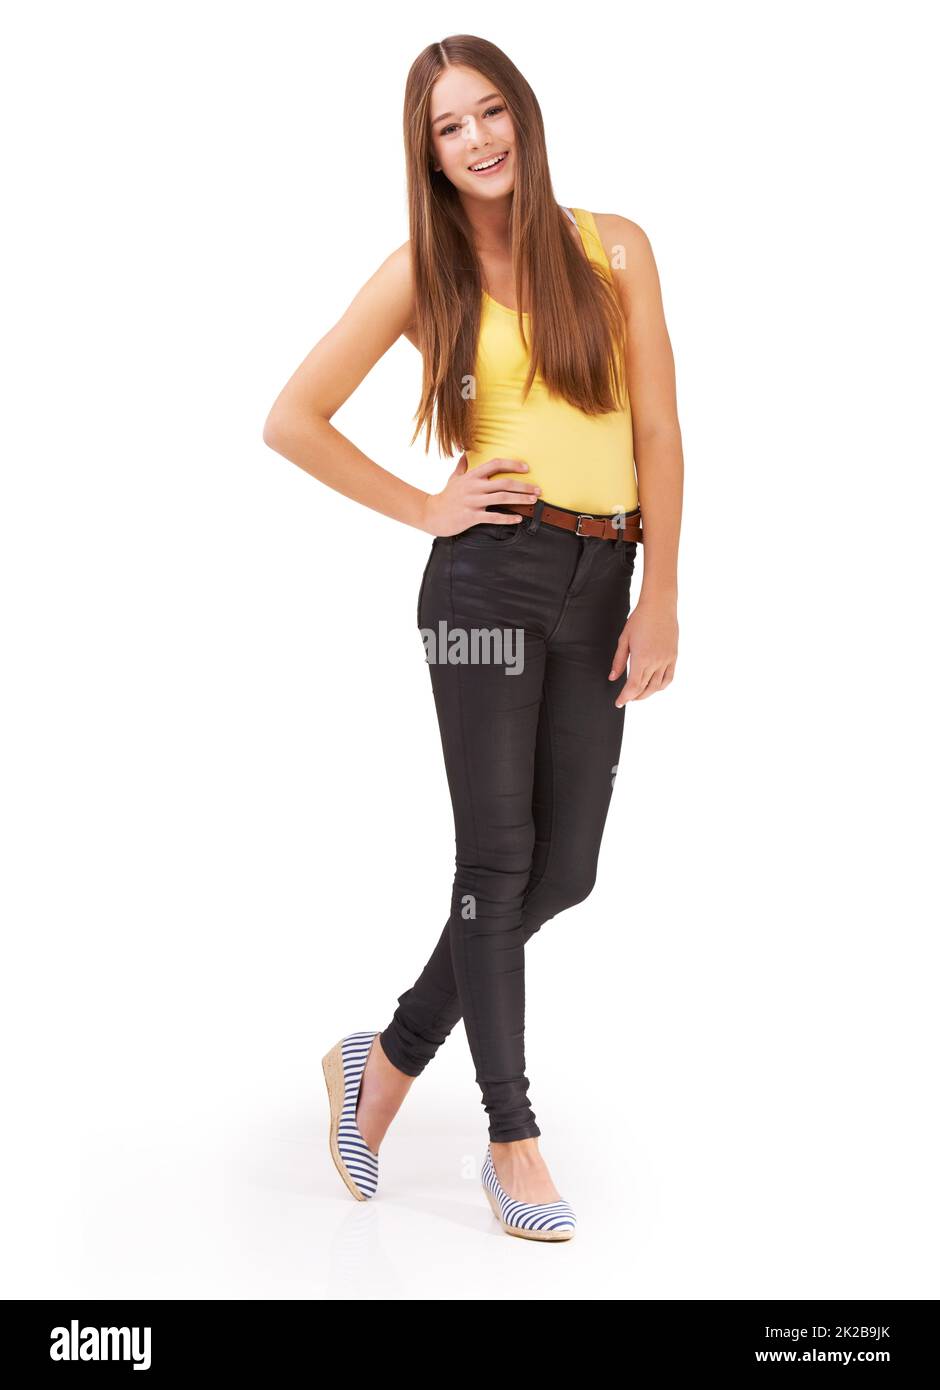 Portrait of young attitude. Shot of a teen girl isolated on white. Stock Photo